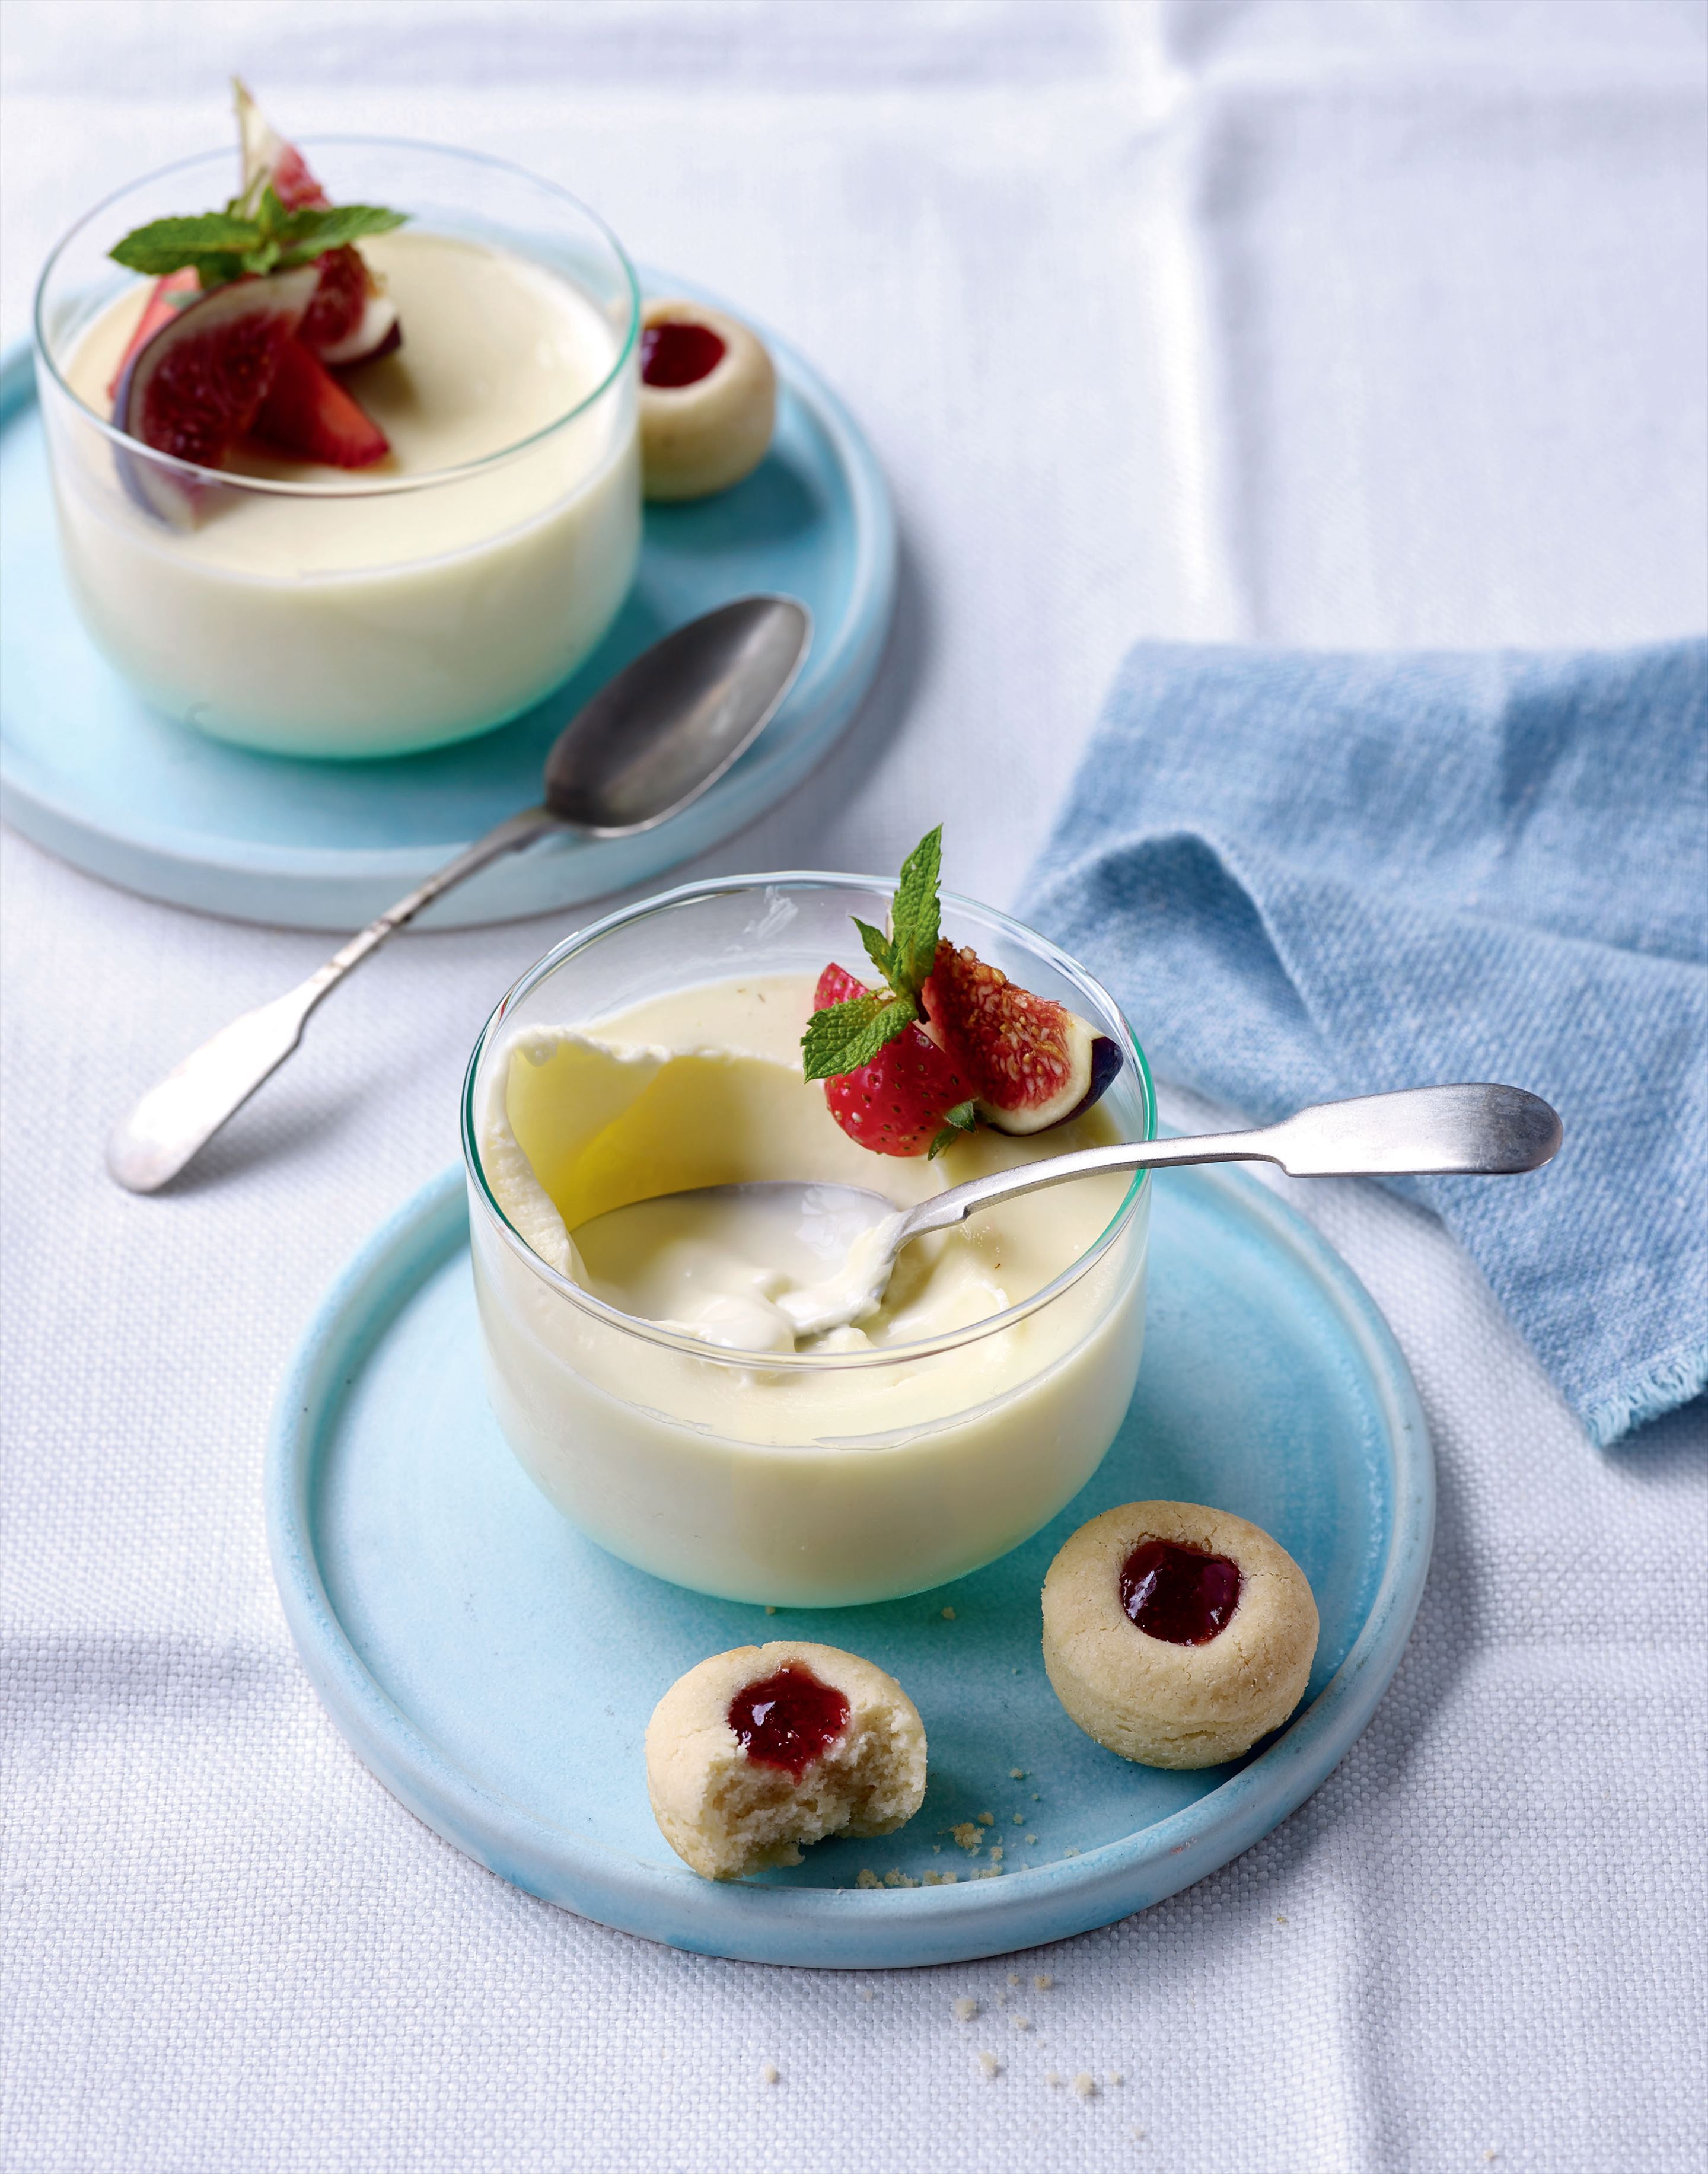 Lemon posset with figs, strawberries and Gran’s shortbreads